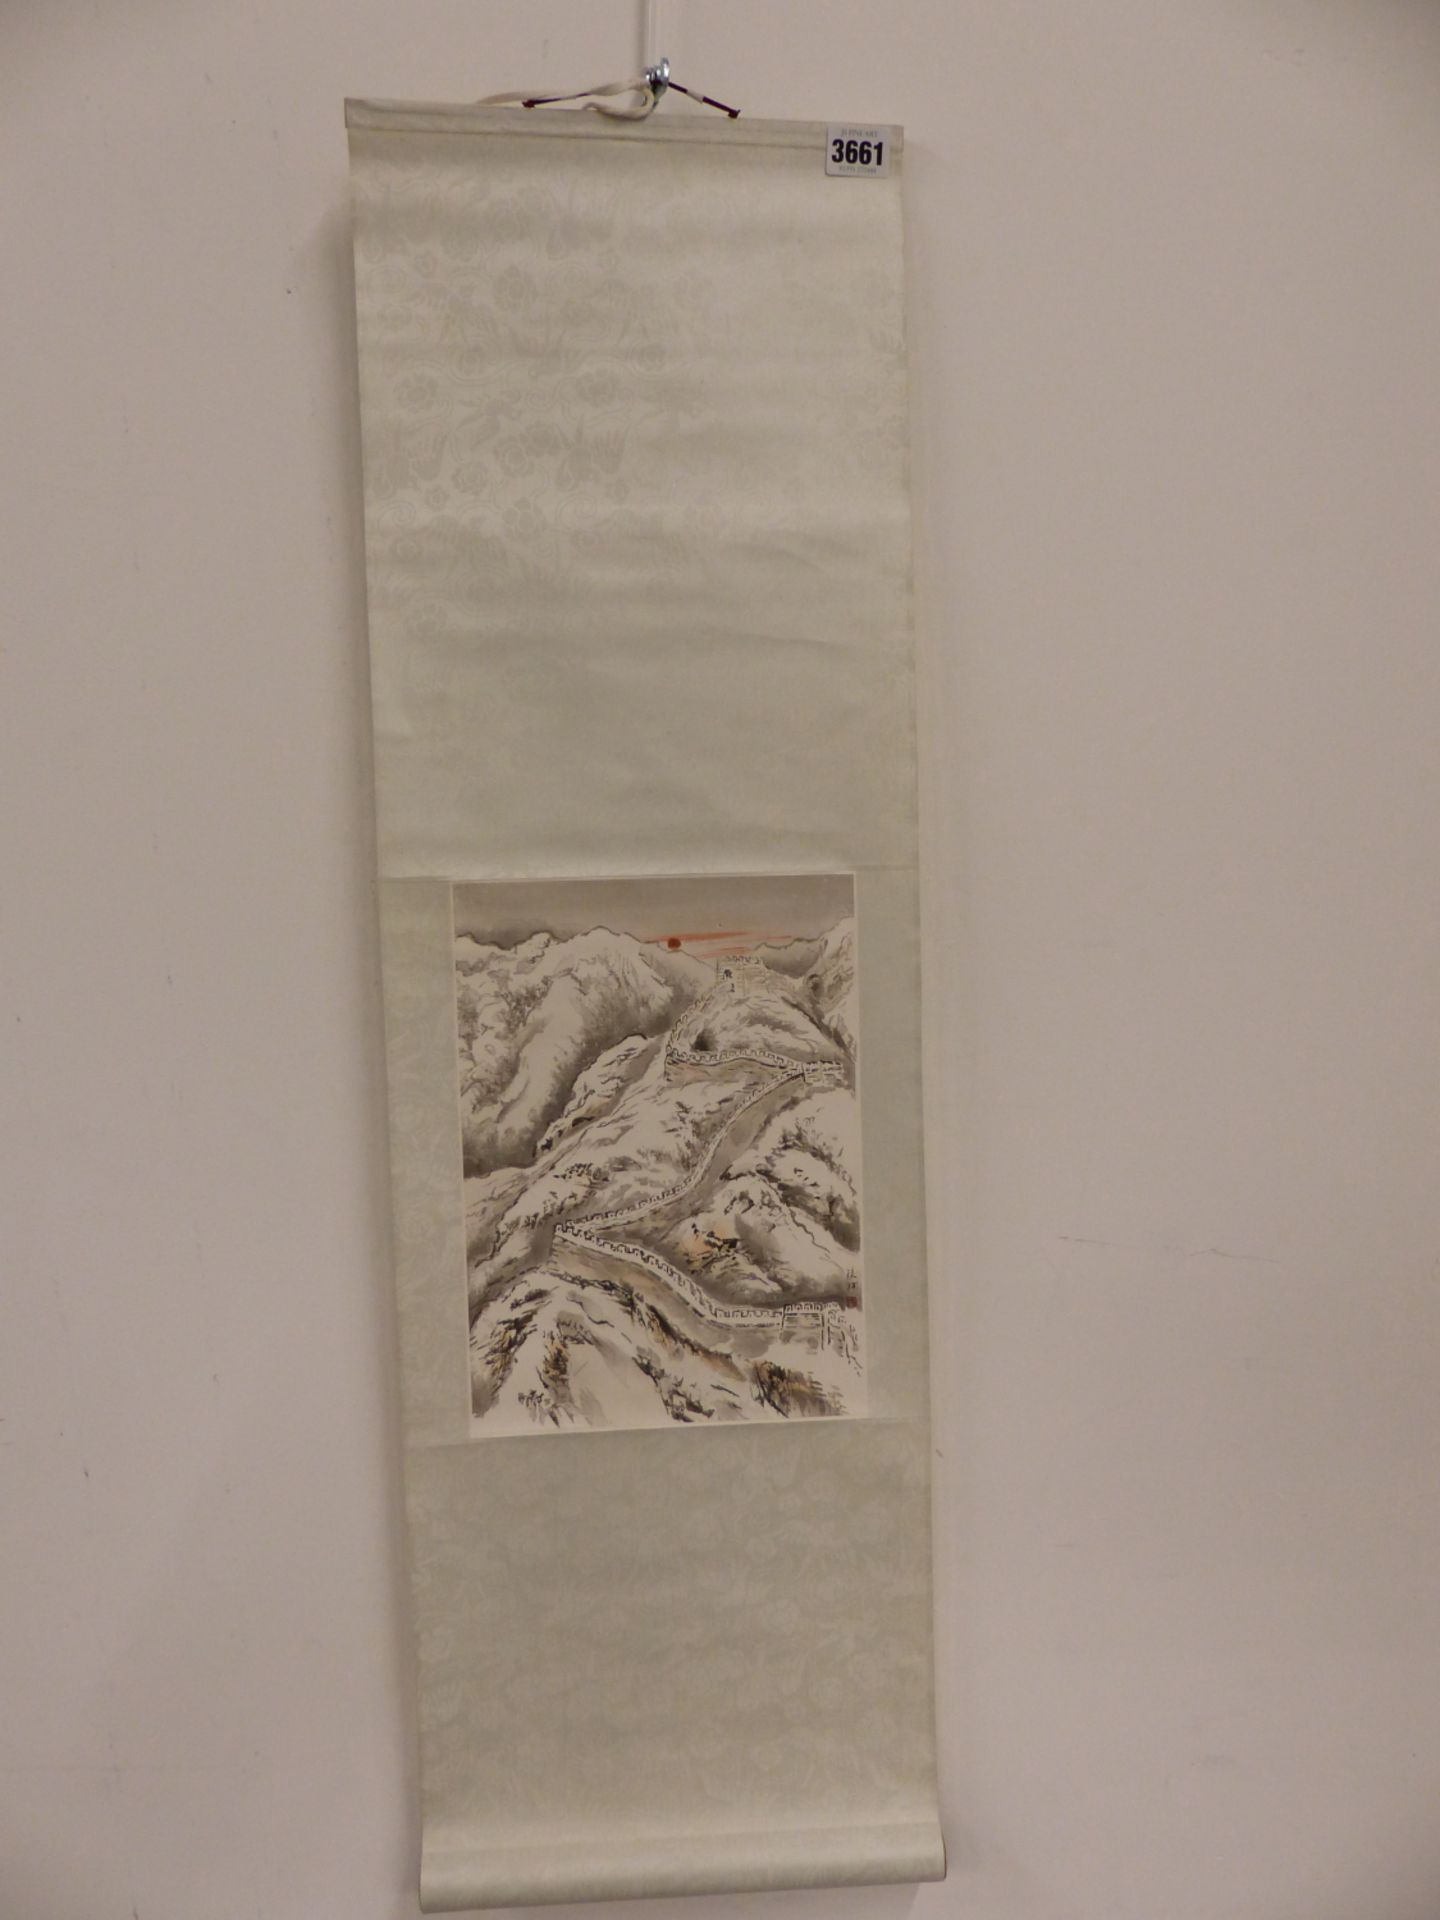 A CHINESE SCROLL PAINTING ILLUSTRATING CHAIRMAN MAO'S POEM- SNOW. BY WU CHING-DING. - Image 3 of 12